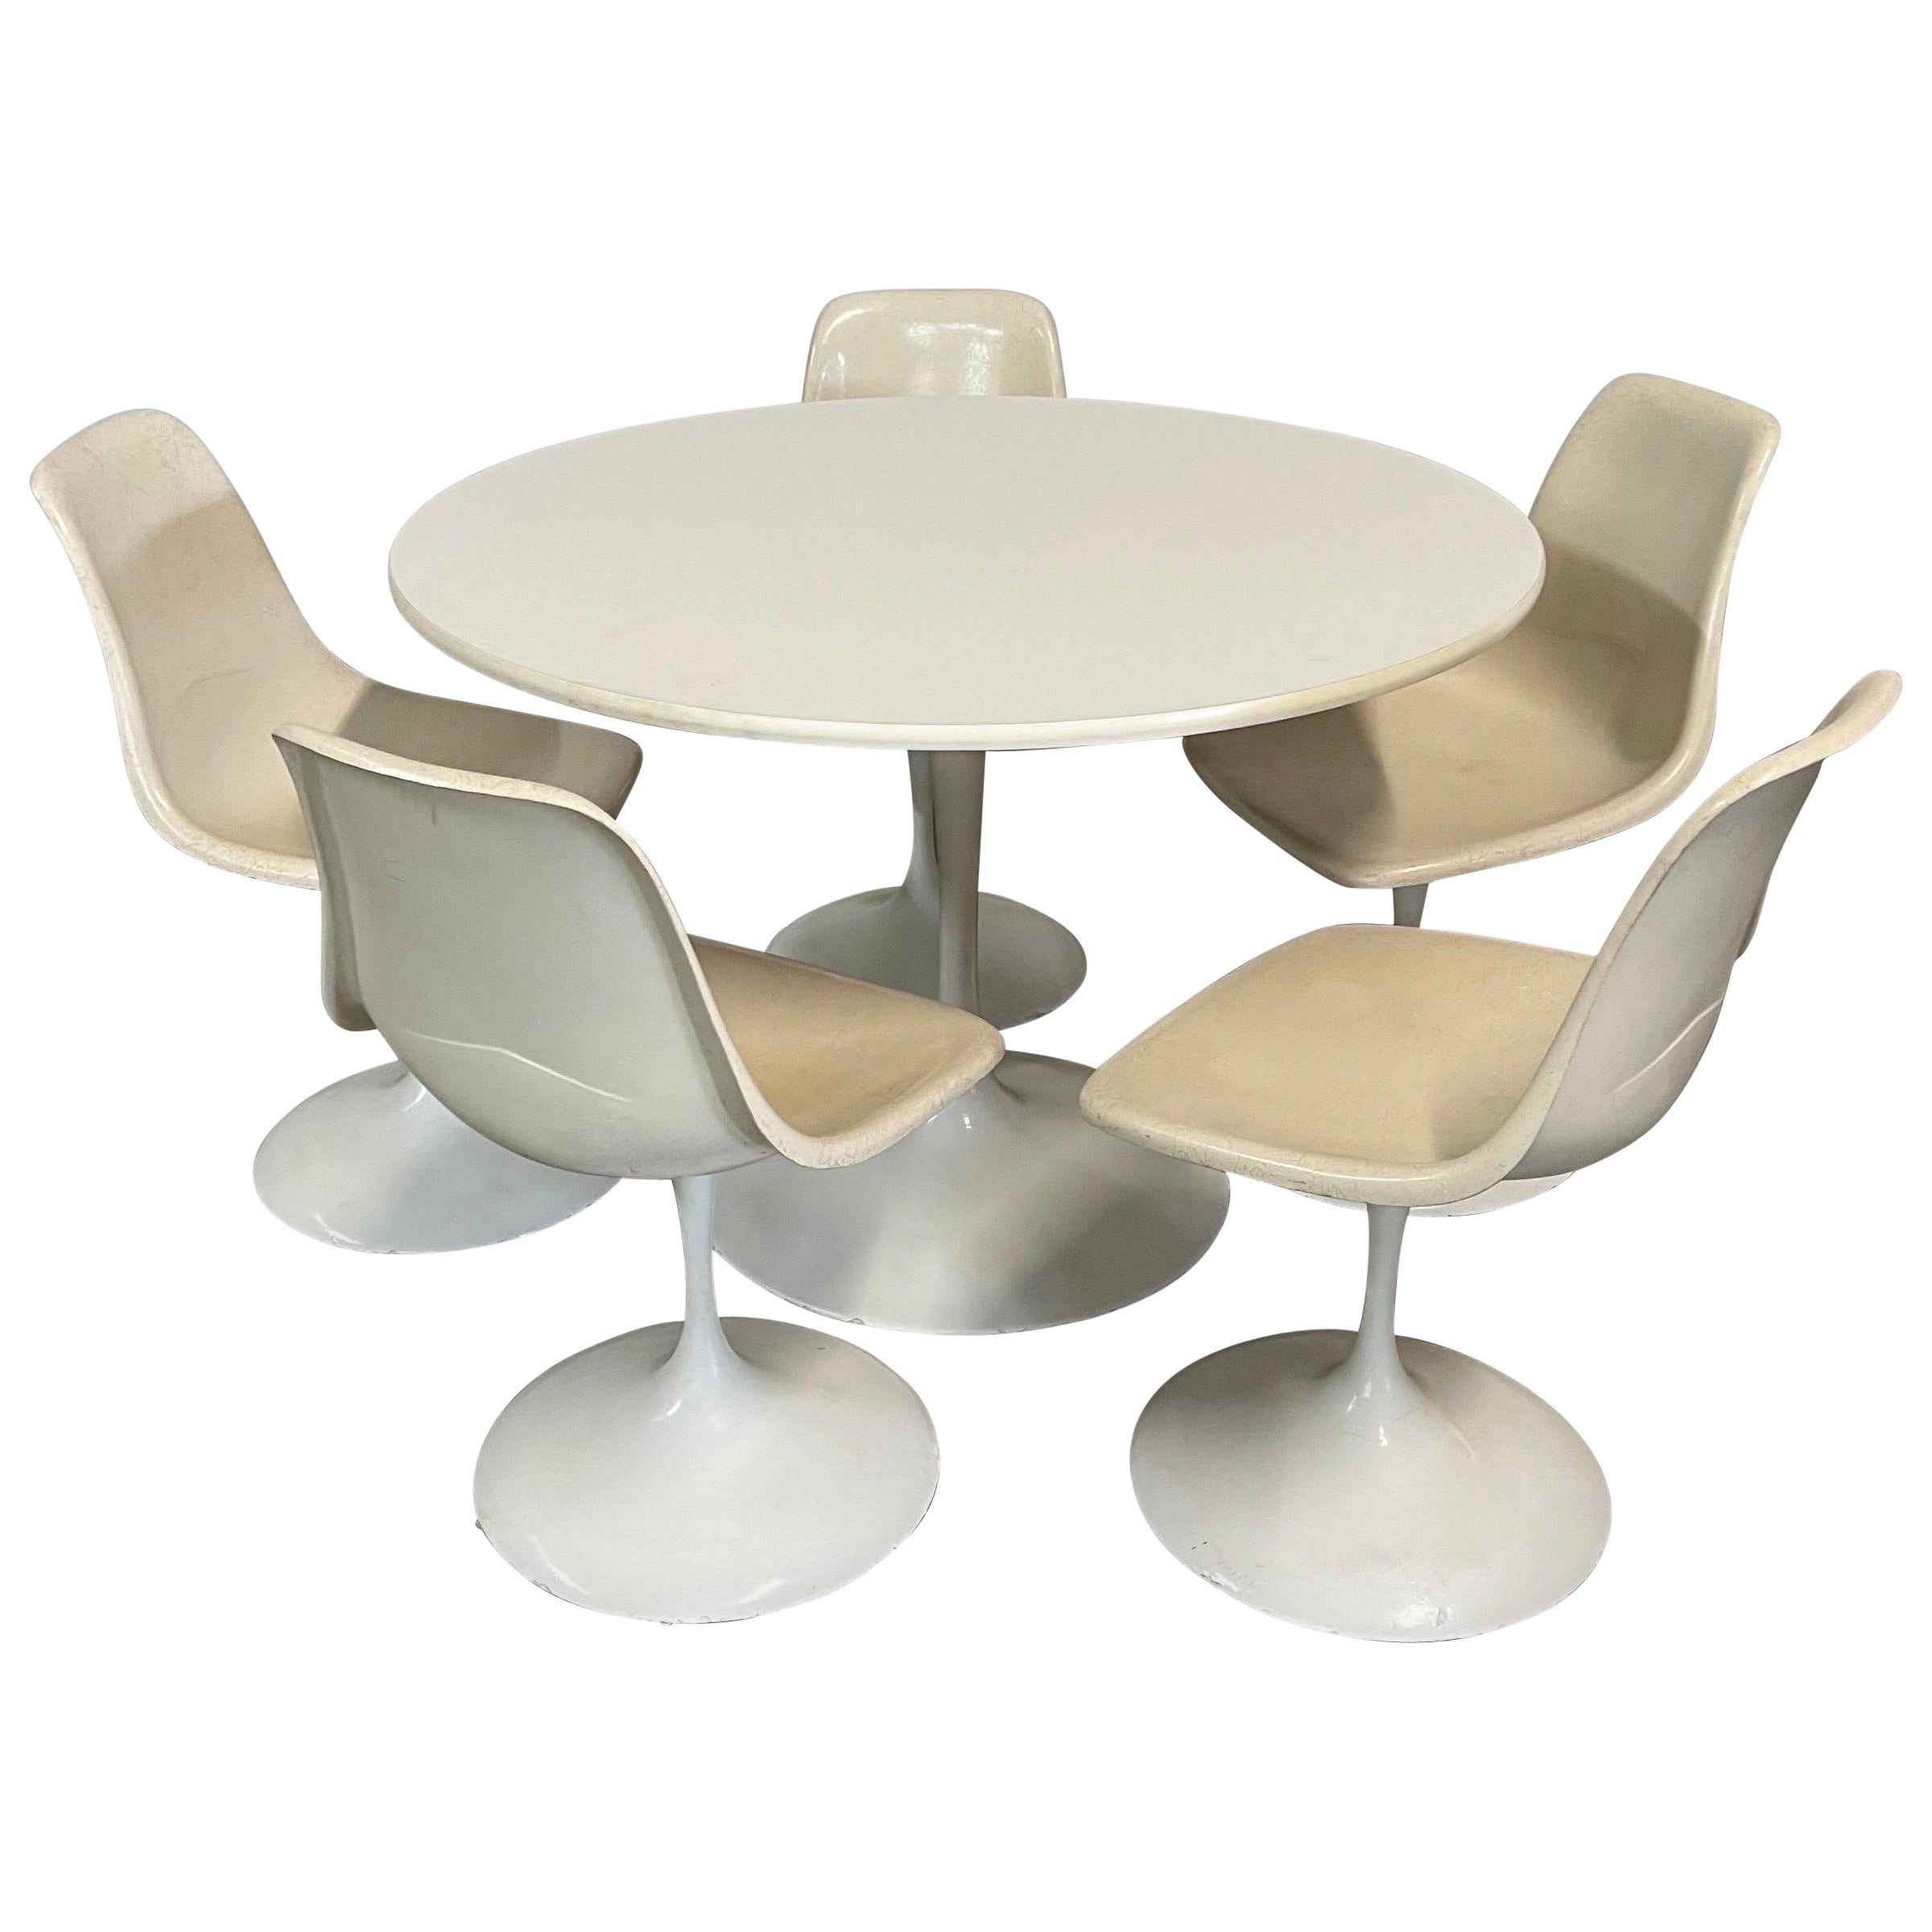 Mid-Century Modern Eero Saarinen Style Tulip Round Dining Table and Chairs For Sale